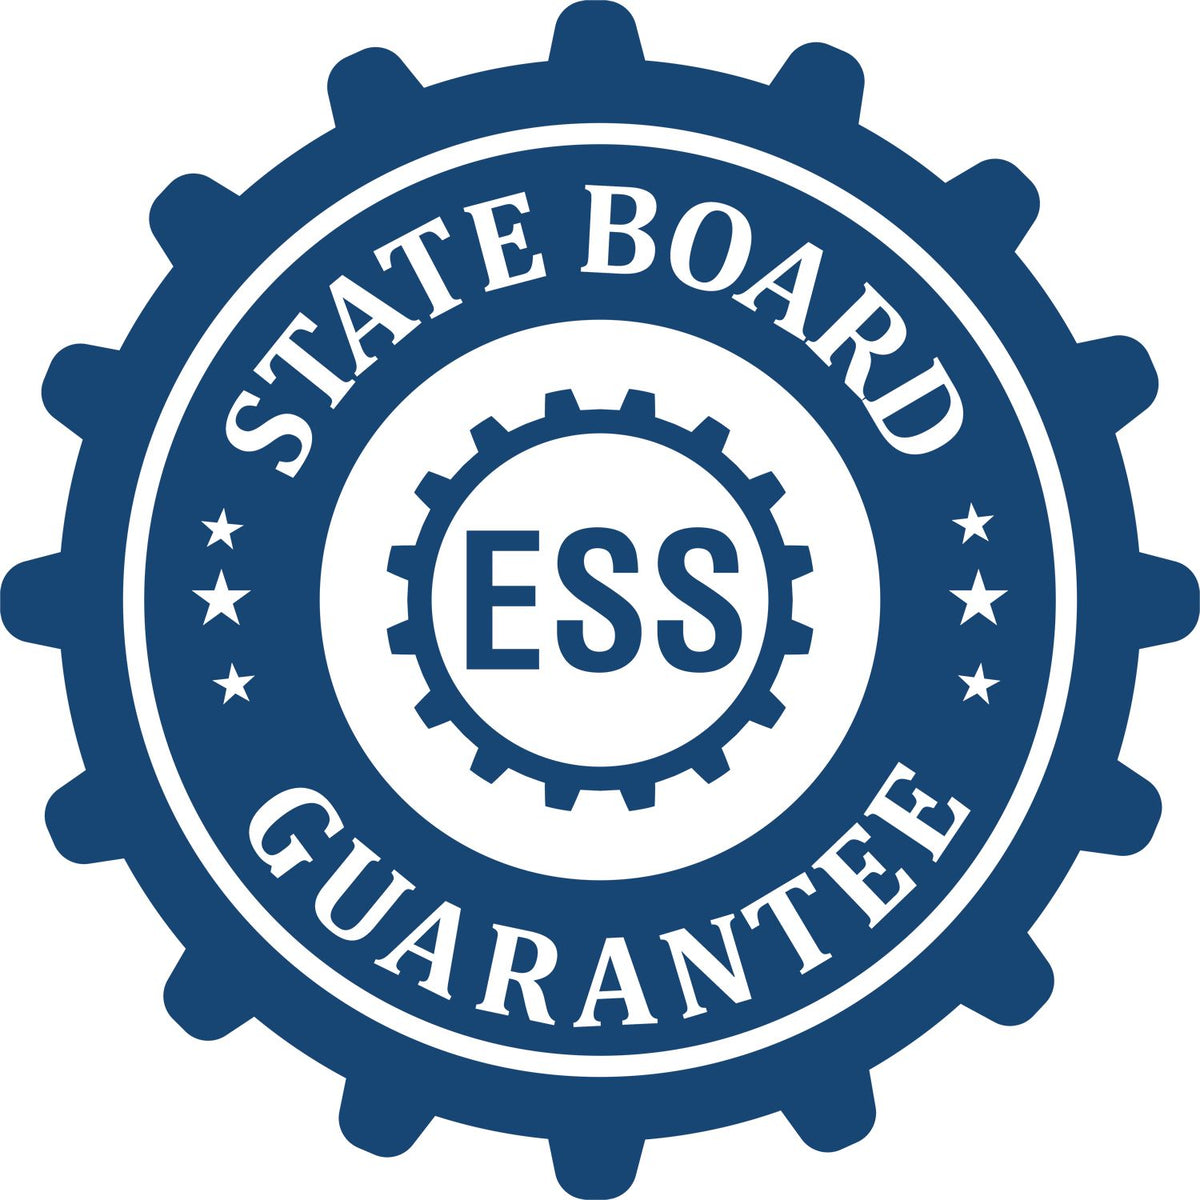 An emblem in a gear shape illustrating a state board guarantee for the State of Nevada Extended Long Reach Geologist Seal